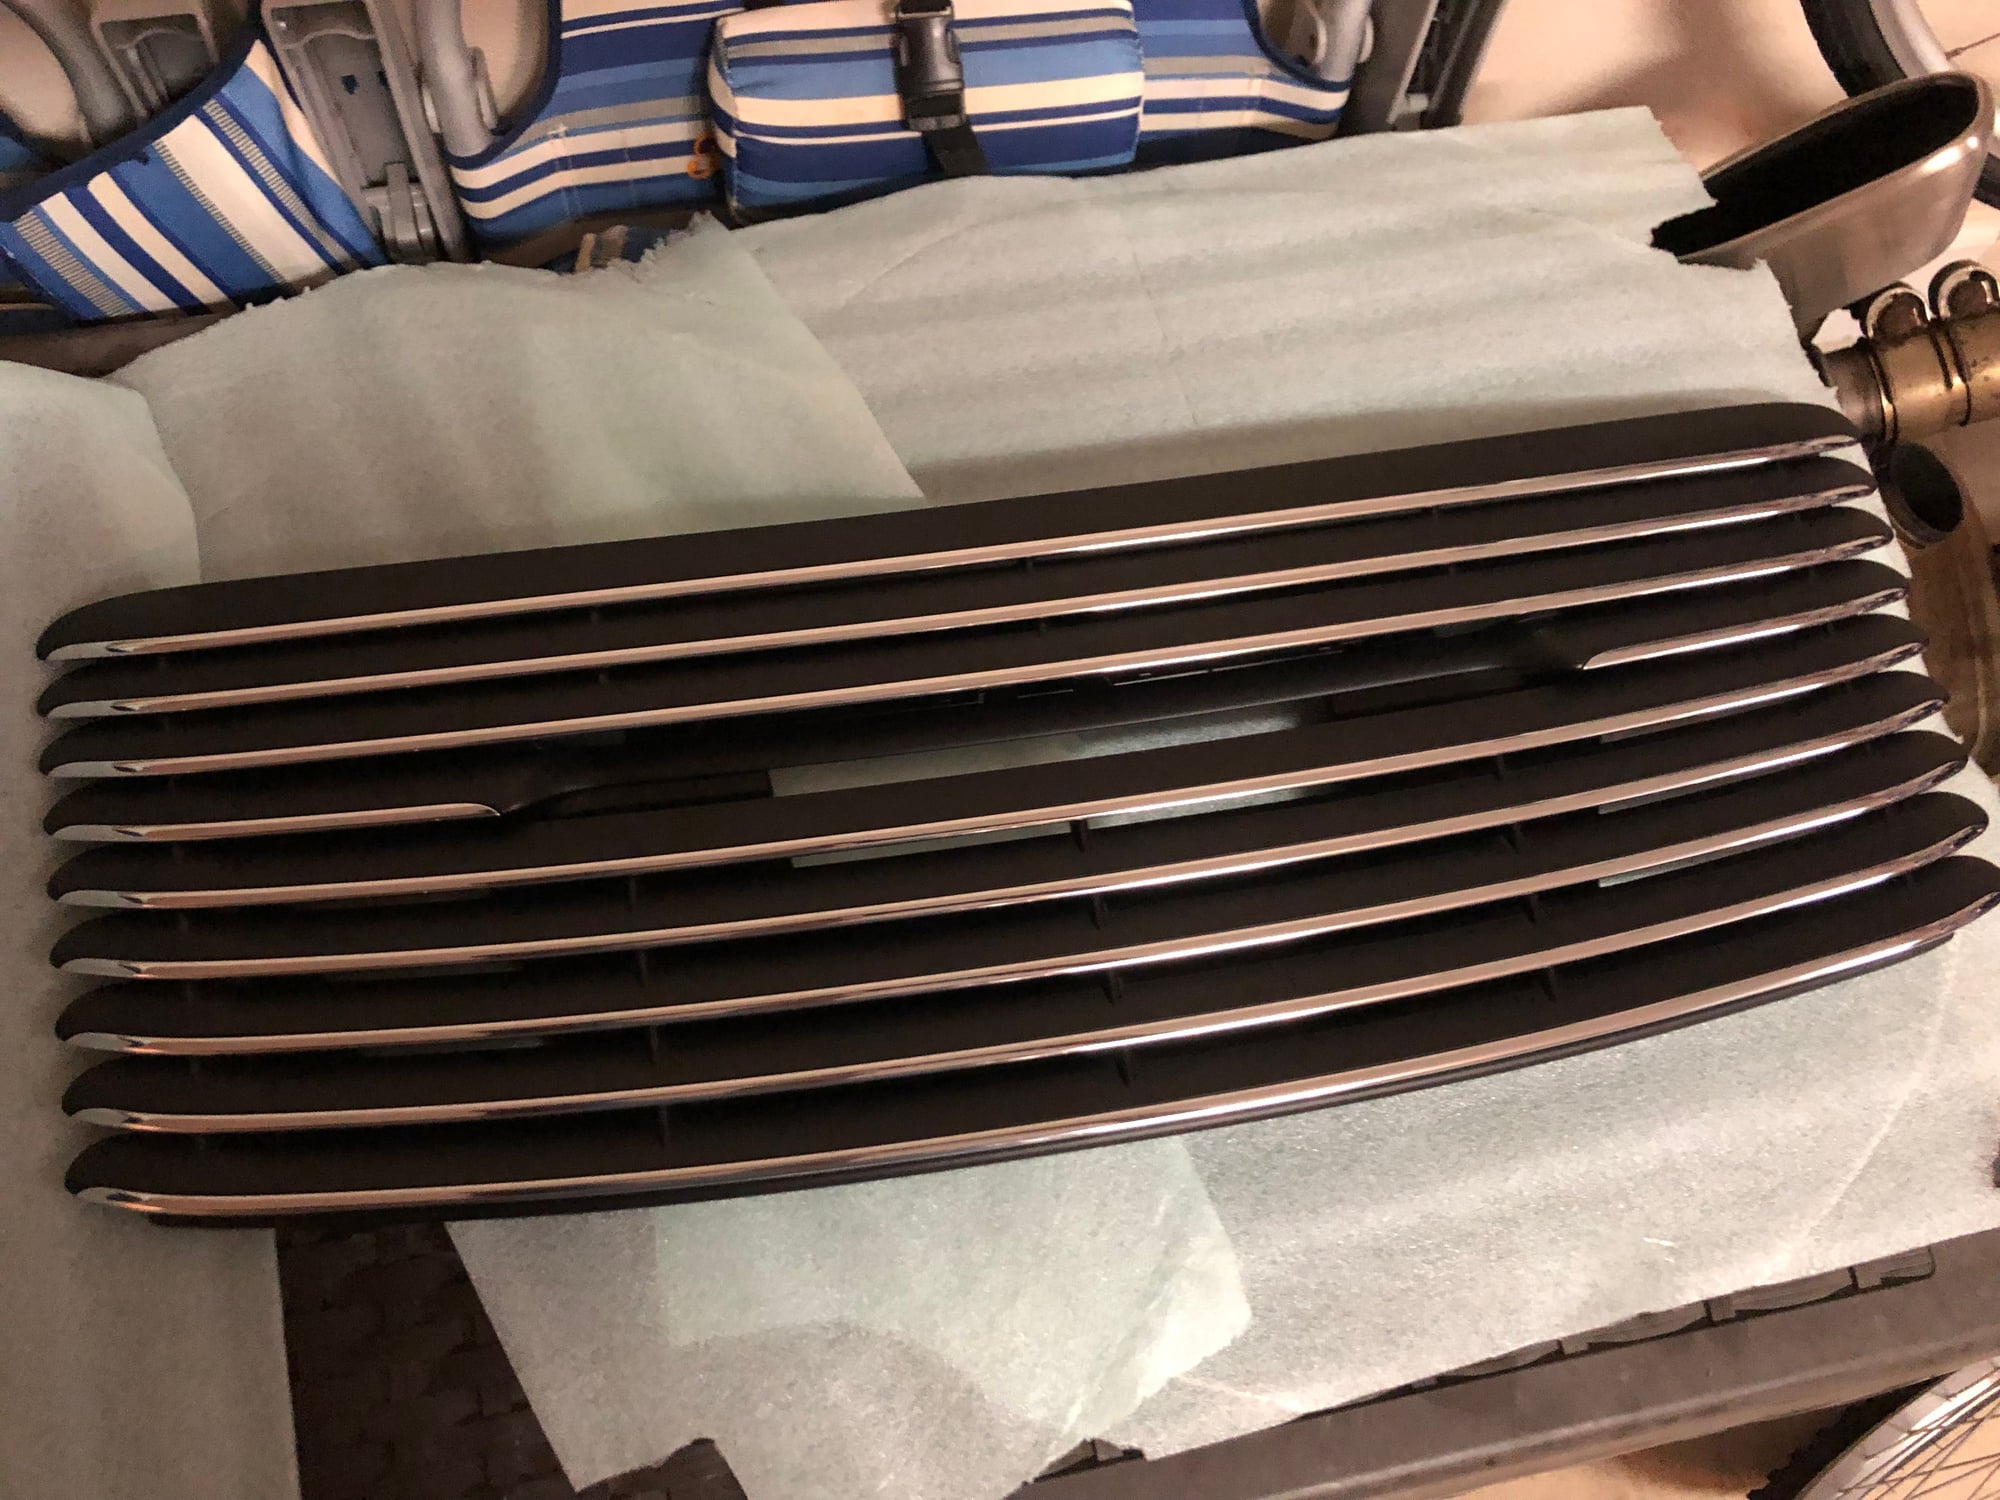 Exterior Body Parts - FS 991.1 OEM 50th anniversary/GTS grille - Used - 2012 to 2016 Porsche 911 - Sarasota, FL 34202, United States